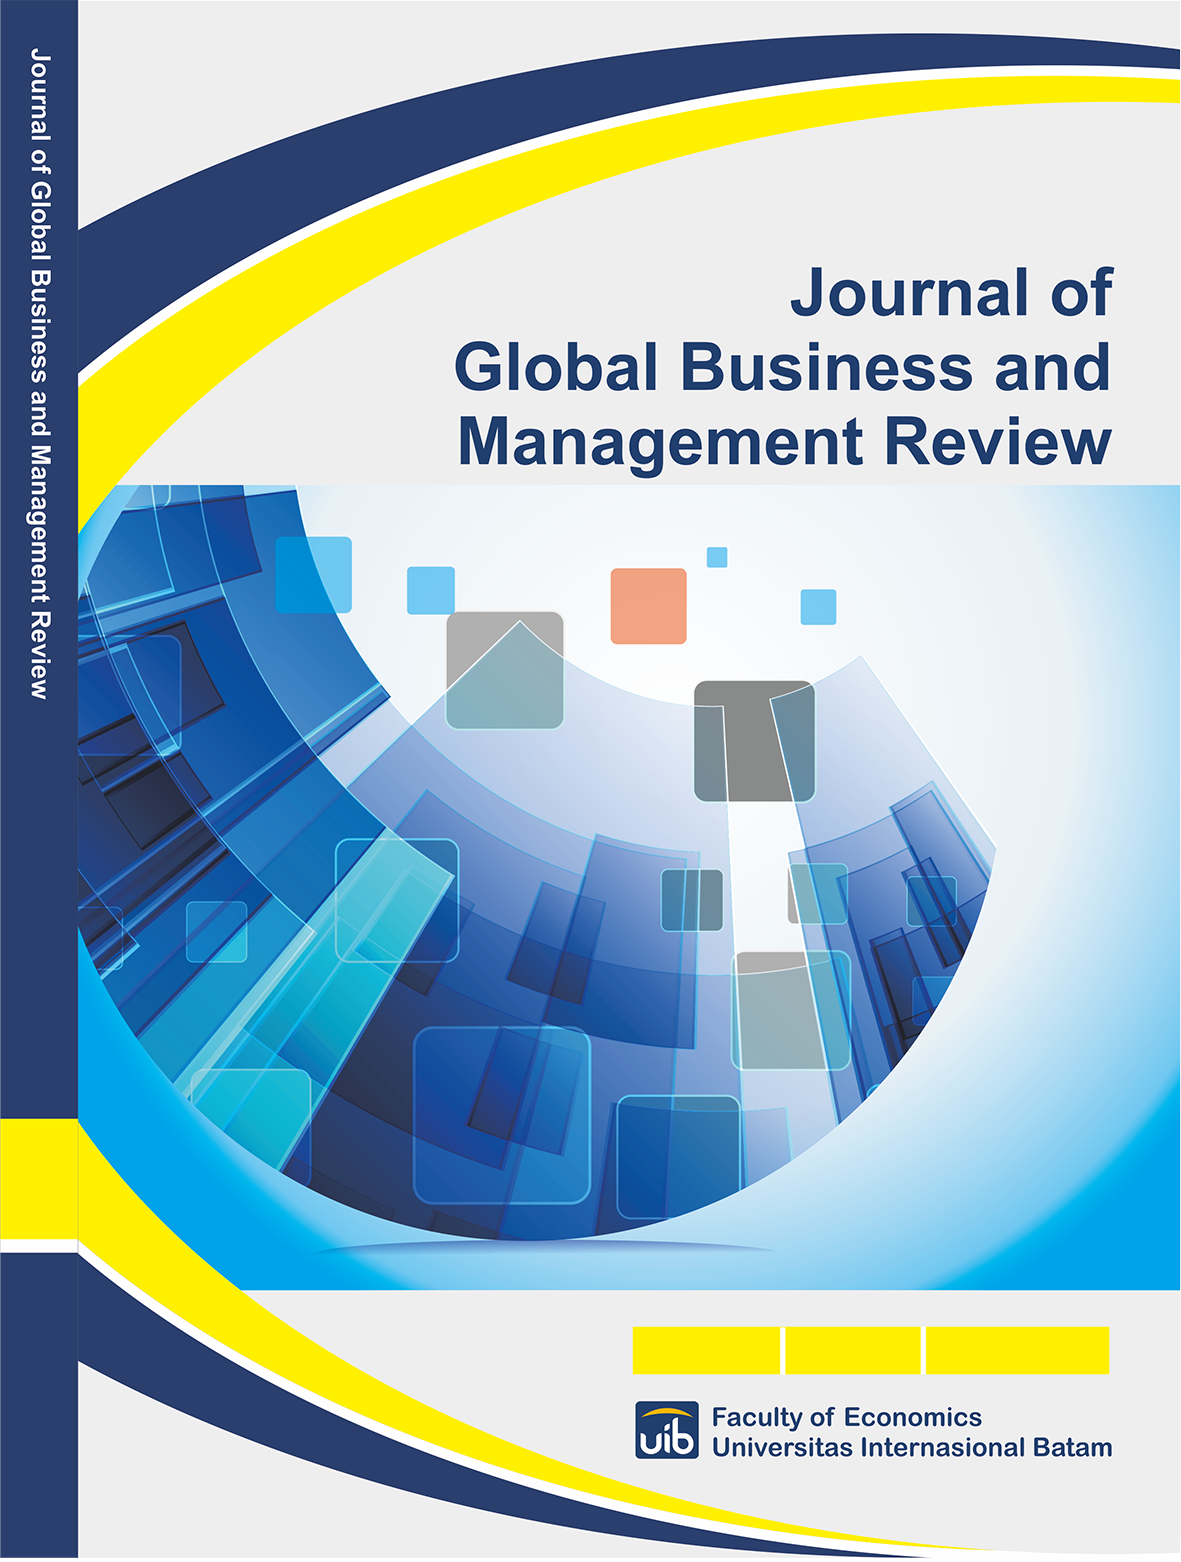 Journal of Global Business and Management Review